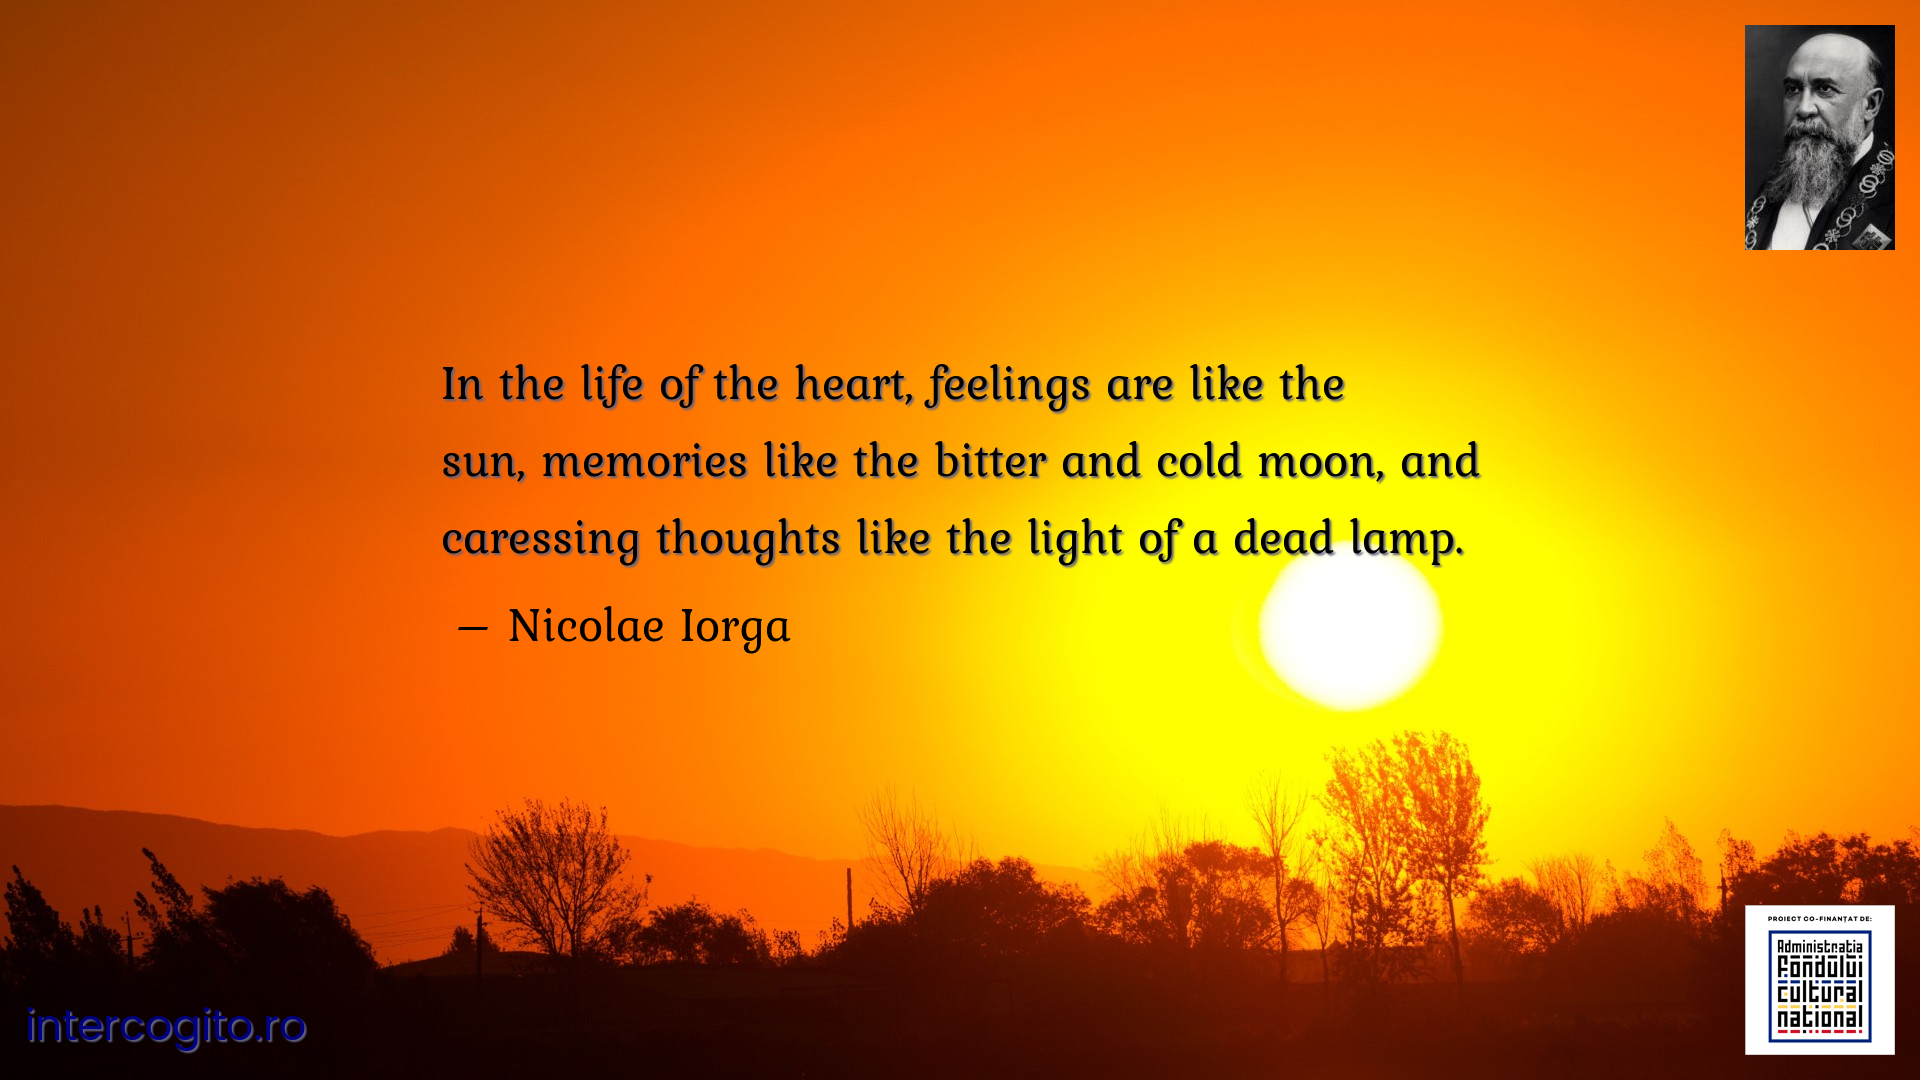 In the life of the heart, feelings are like the sun, memories like the bitter and cold moon, and caressing thoughts like the light of a dead lamp.